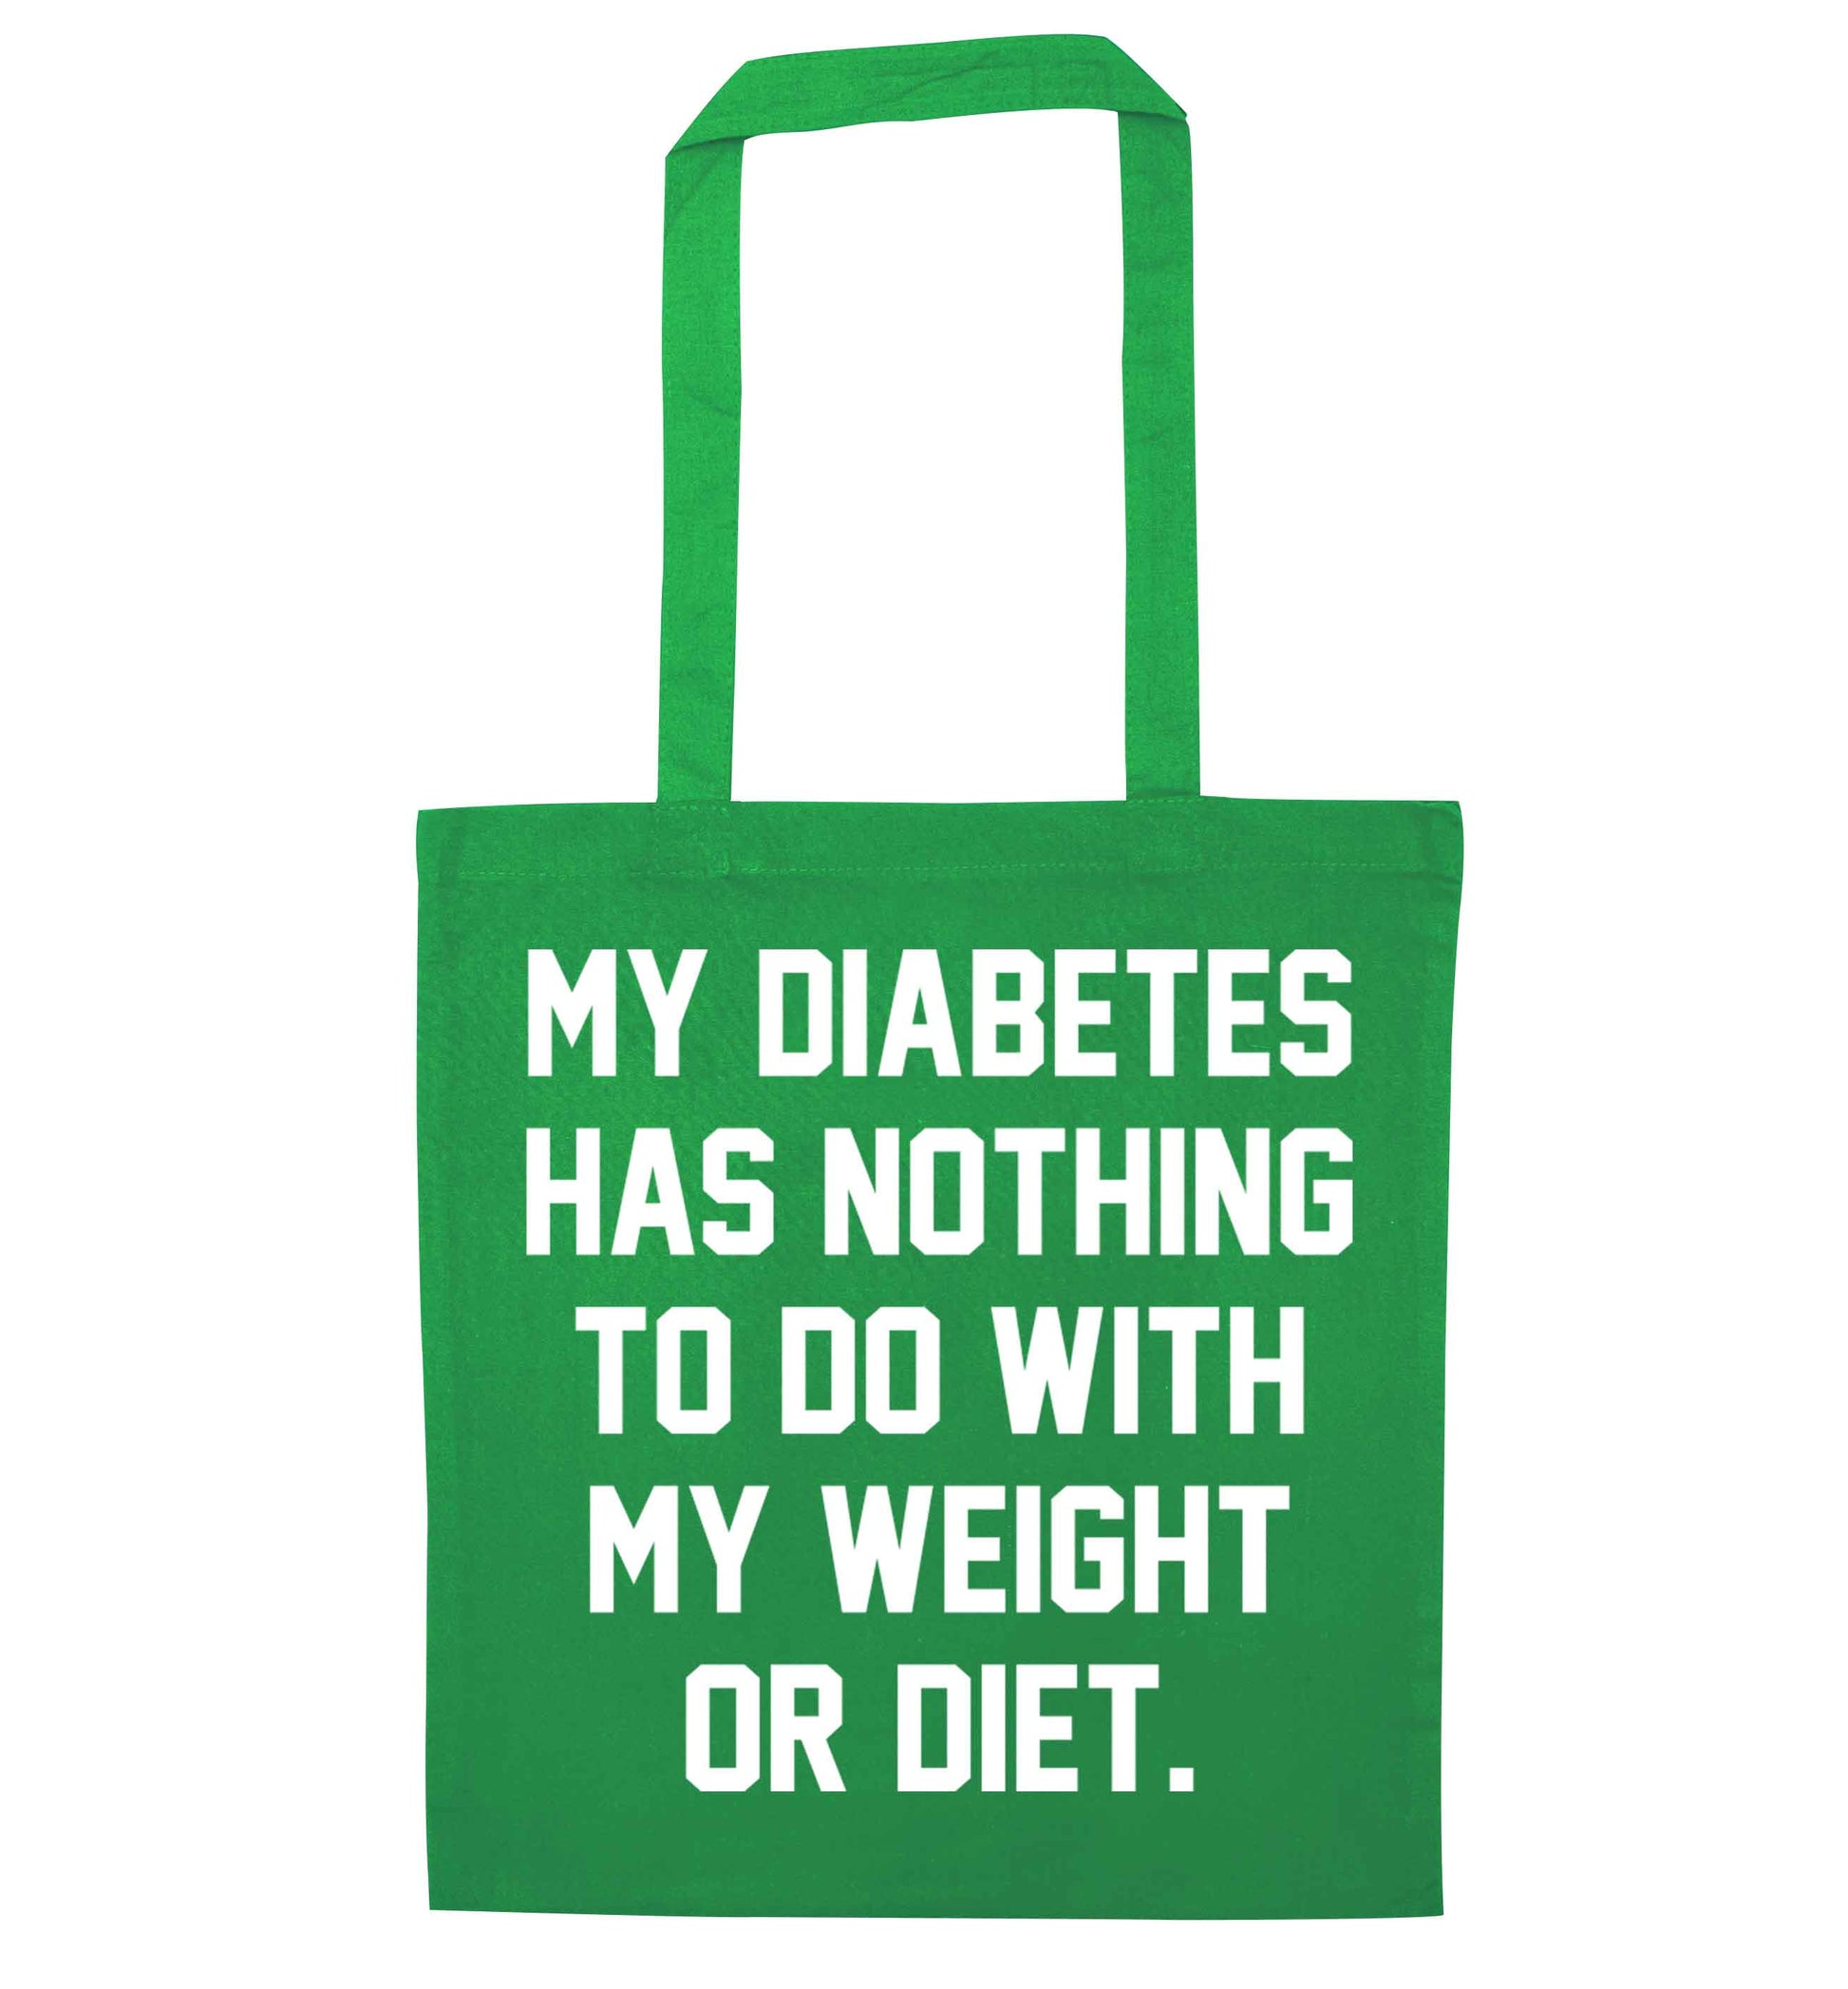 My diabetes has nothing to do with my weight or diet green tote bag